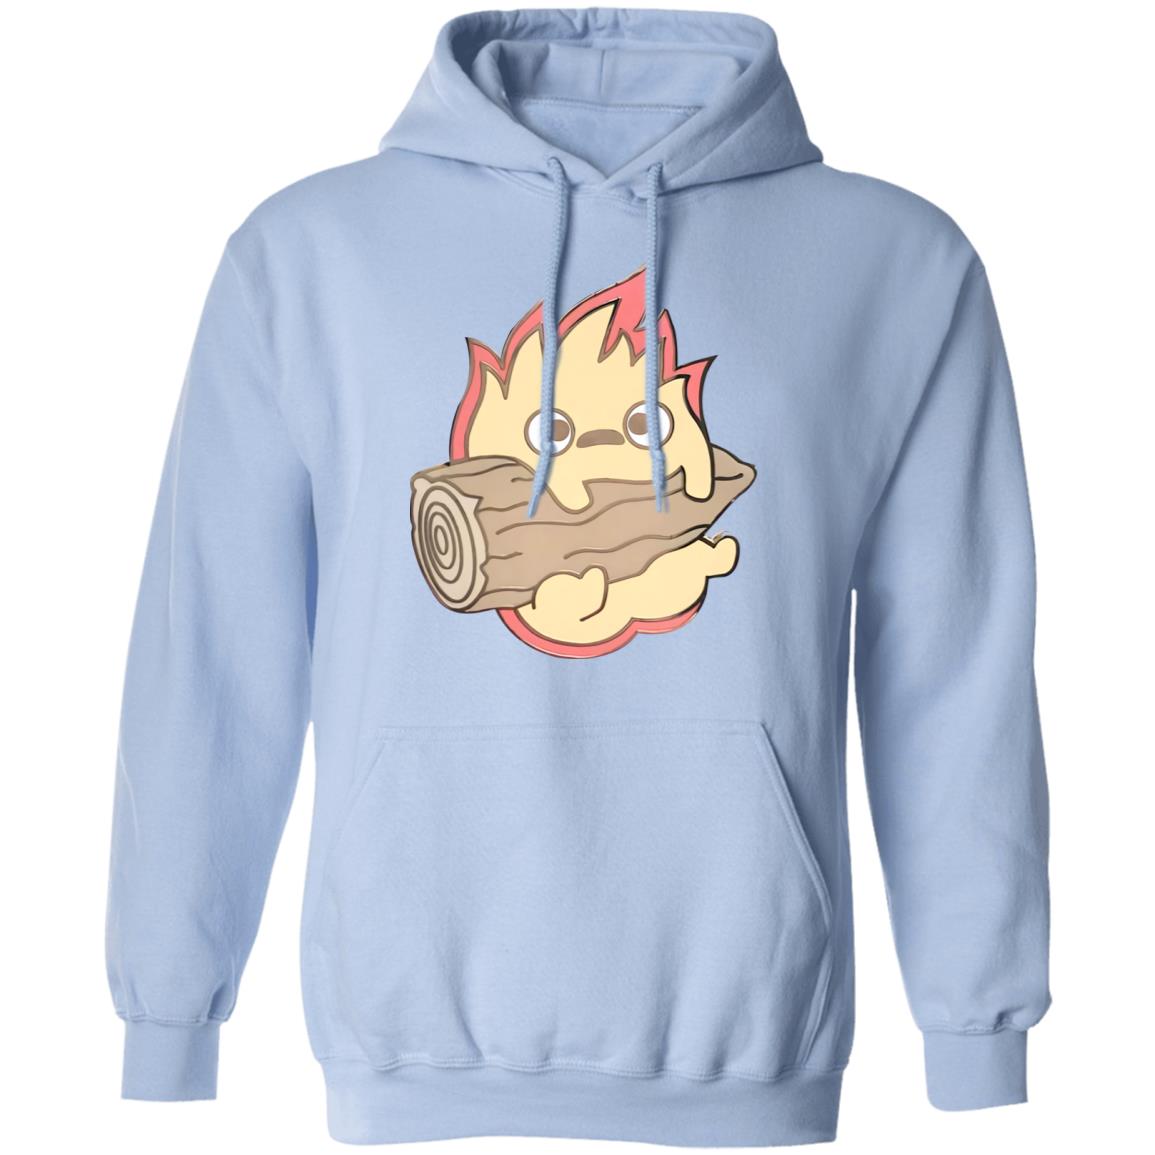 Howl’s Moving Castle – Calcifer Chibi Hoodie